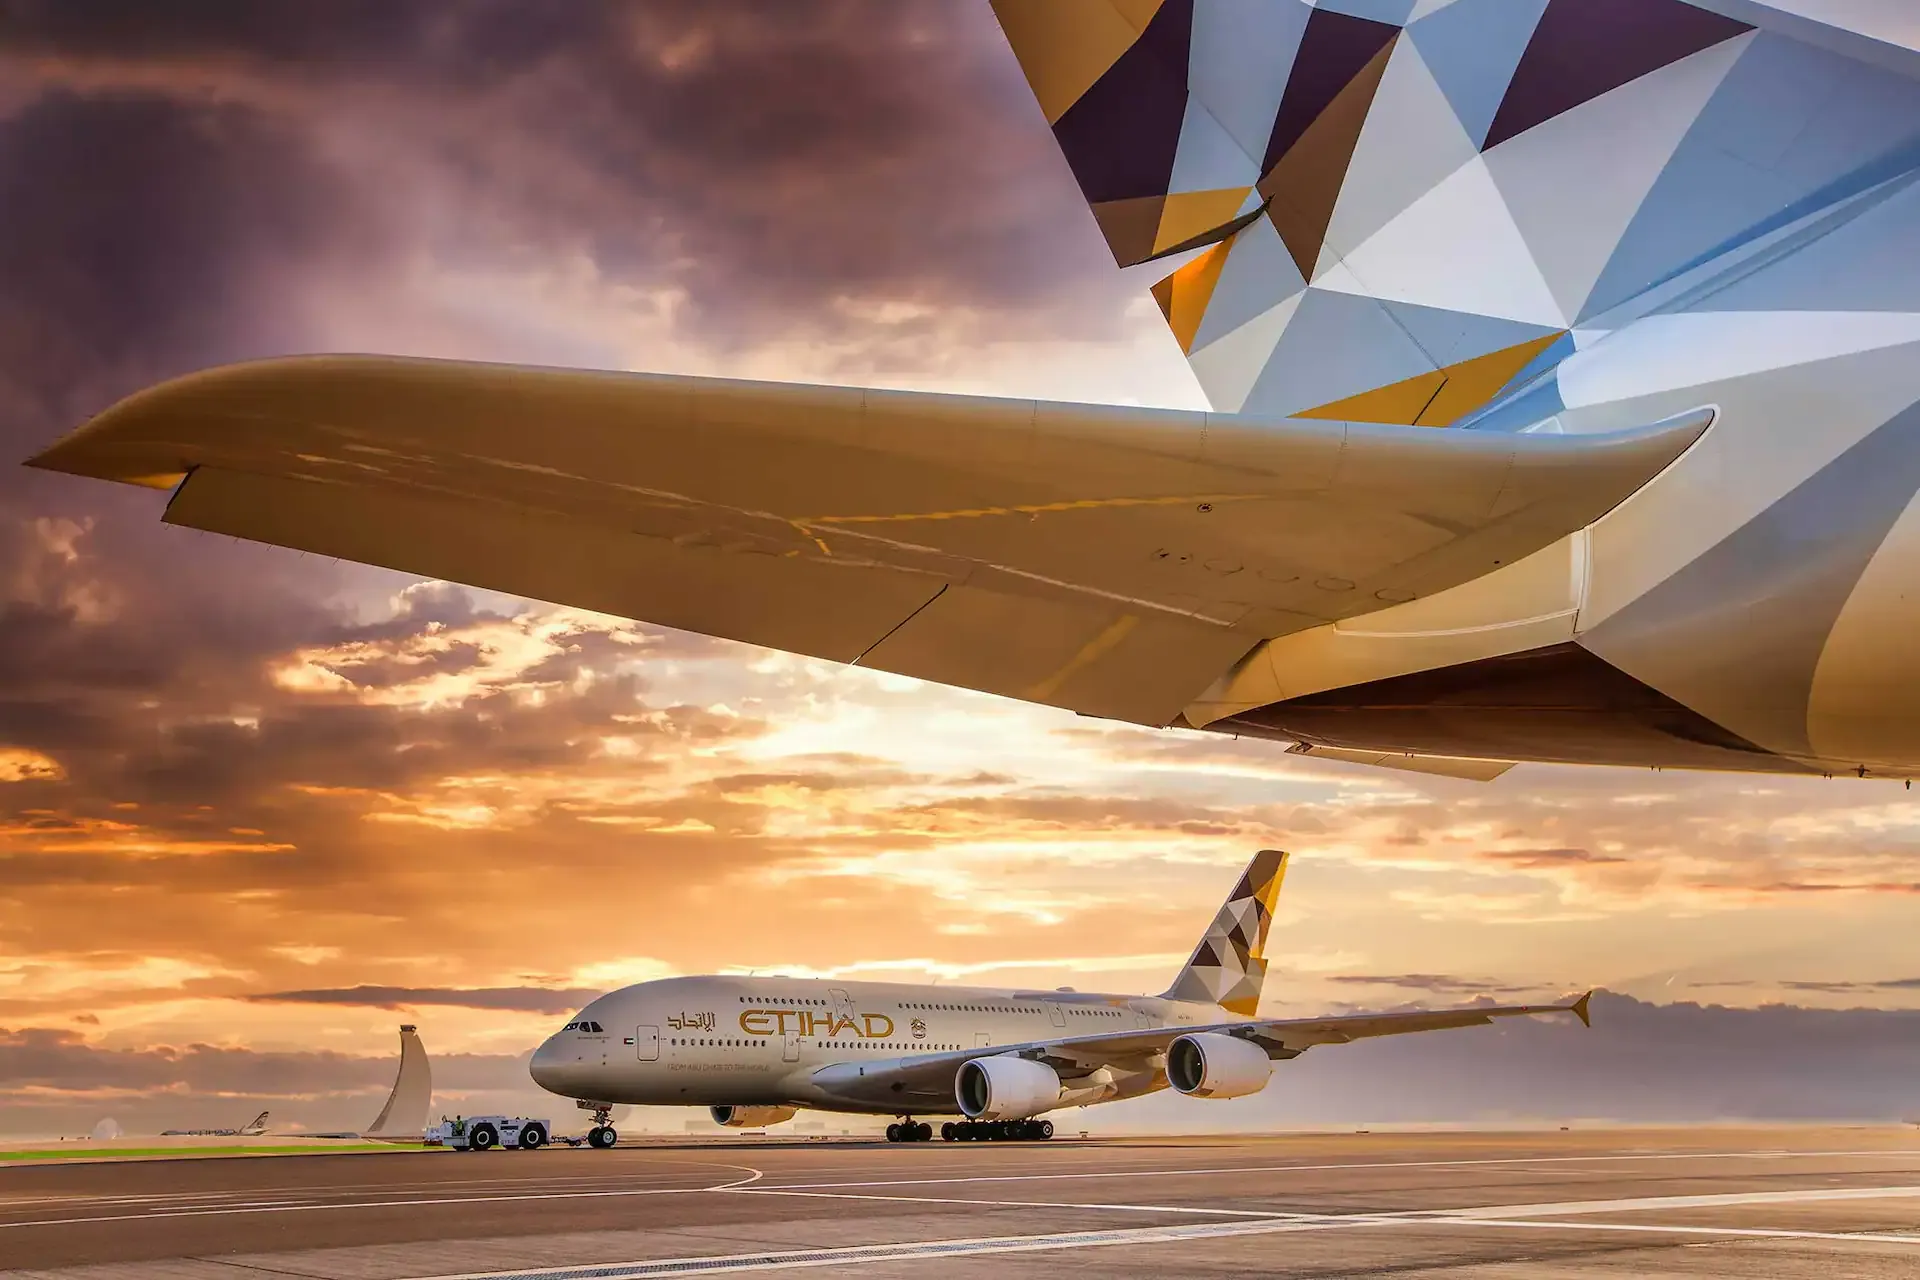 Ownership of Etihad Airways was transferred to UAE sovereign wealth fund ADQ in 2022 to boost Abu Dhabi’s status as a transport hub